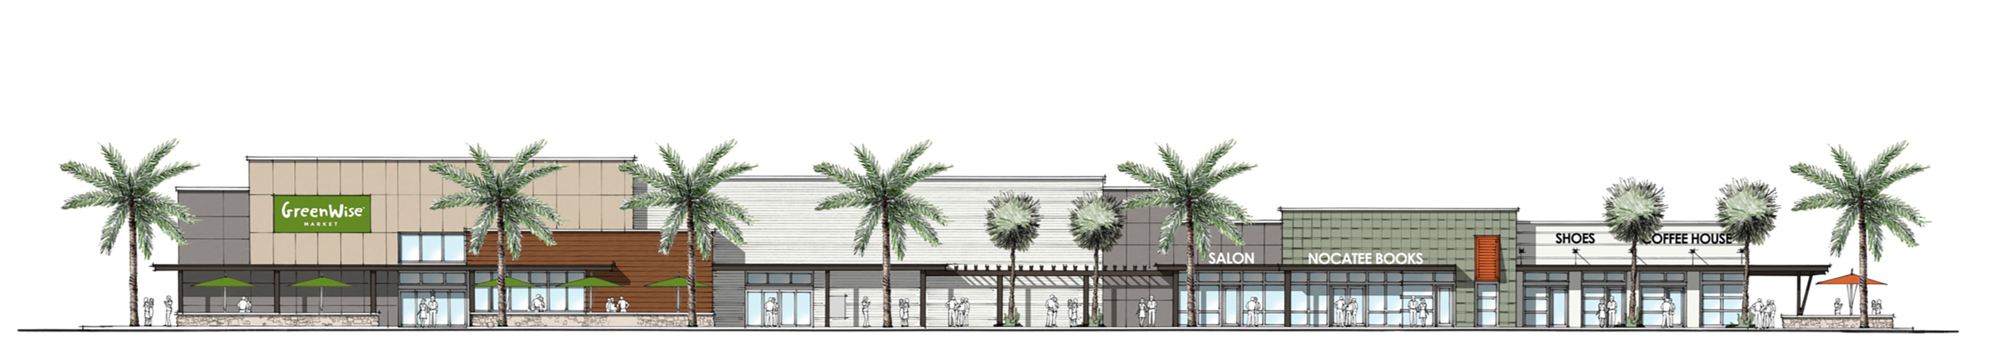 A rendering of the elevation of the Publix GreenWise planned at Nocatee Town Center. The other signage for salon, books, shoes and a coffee house are not actual tenants but are placeholders to show potential tenants.